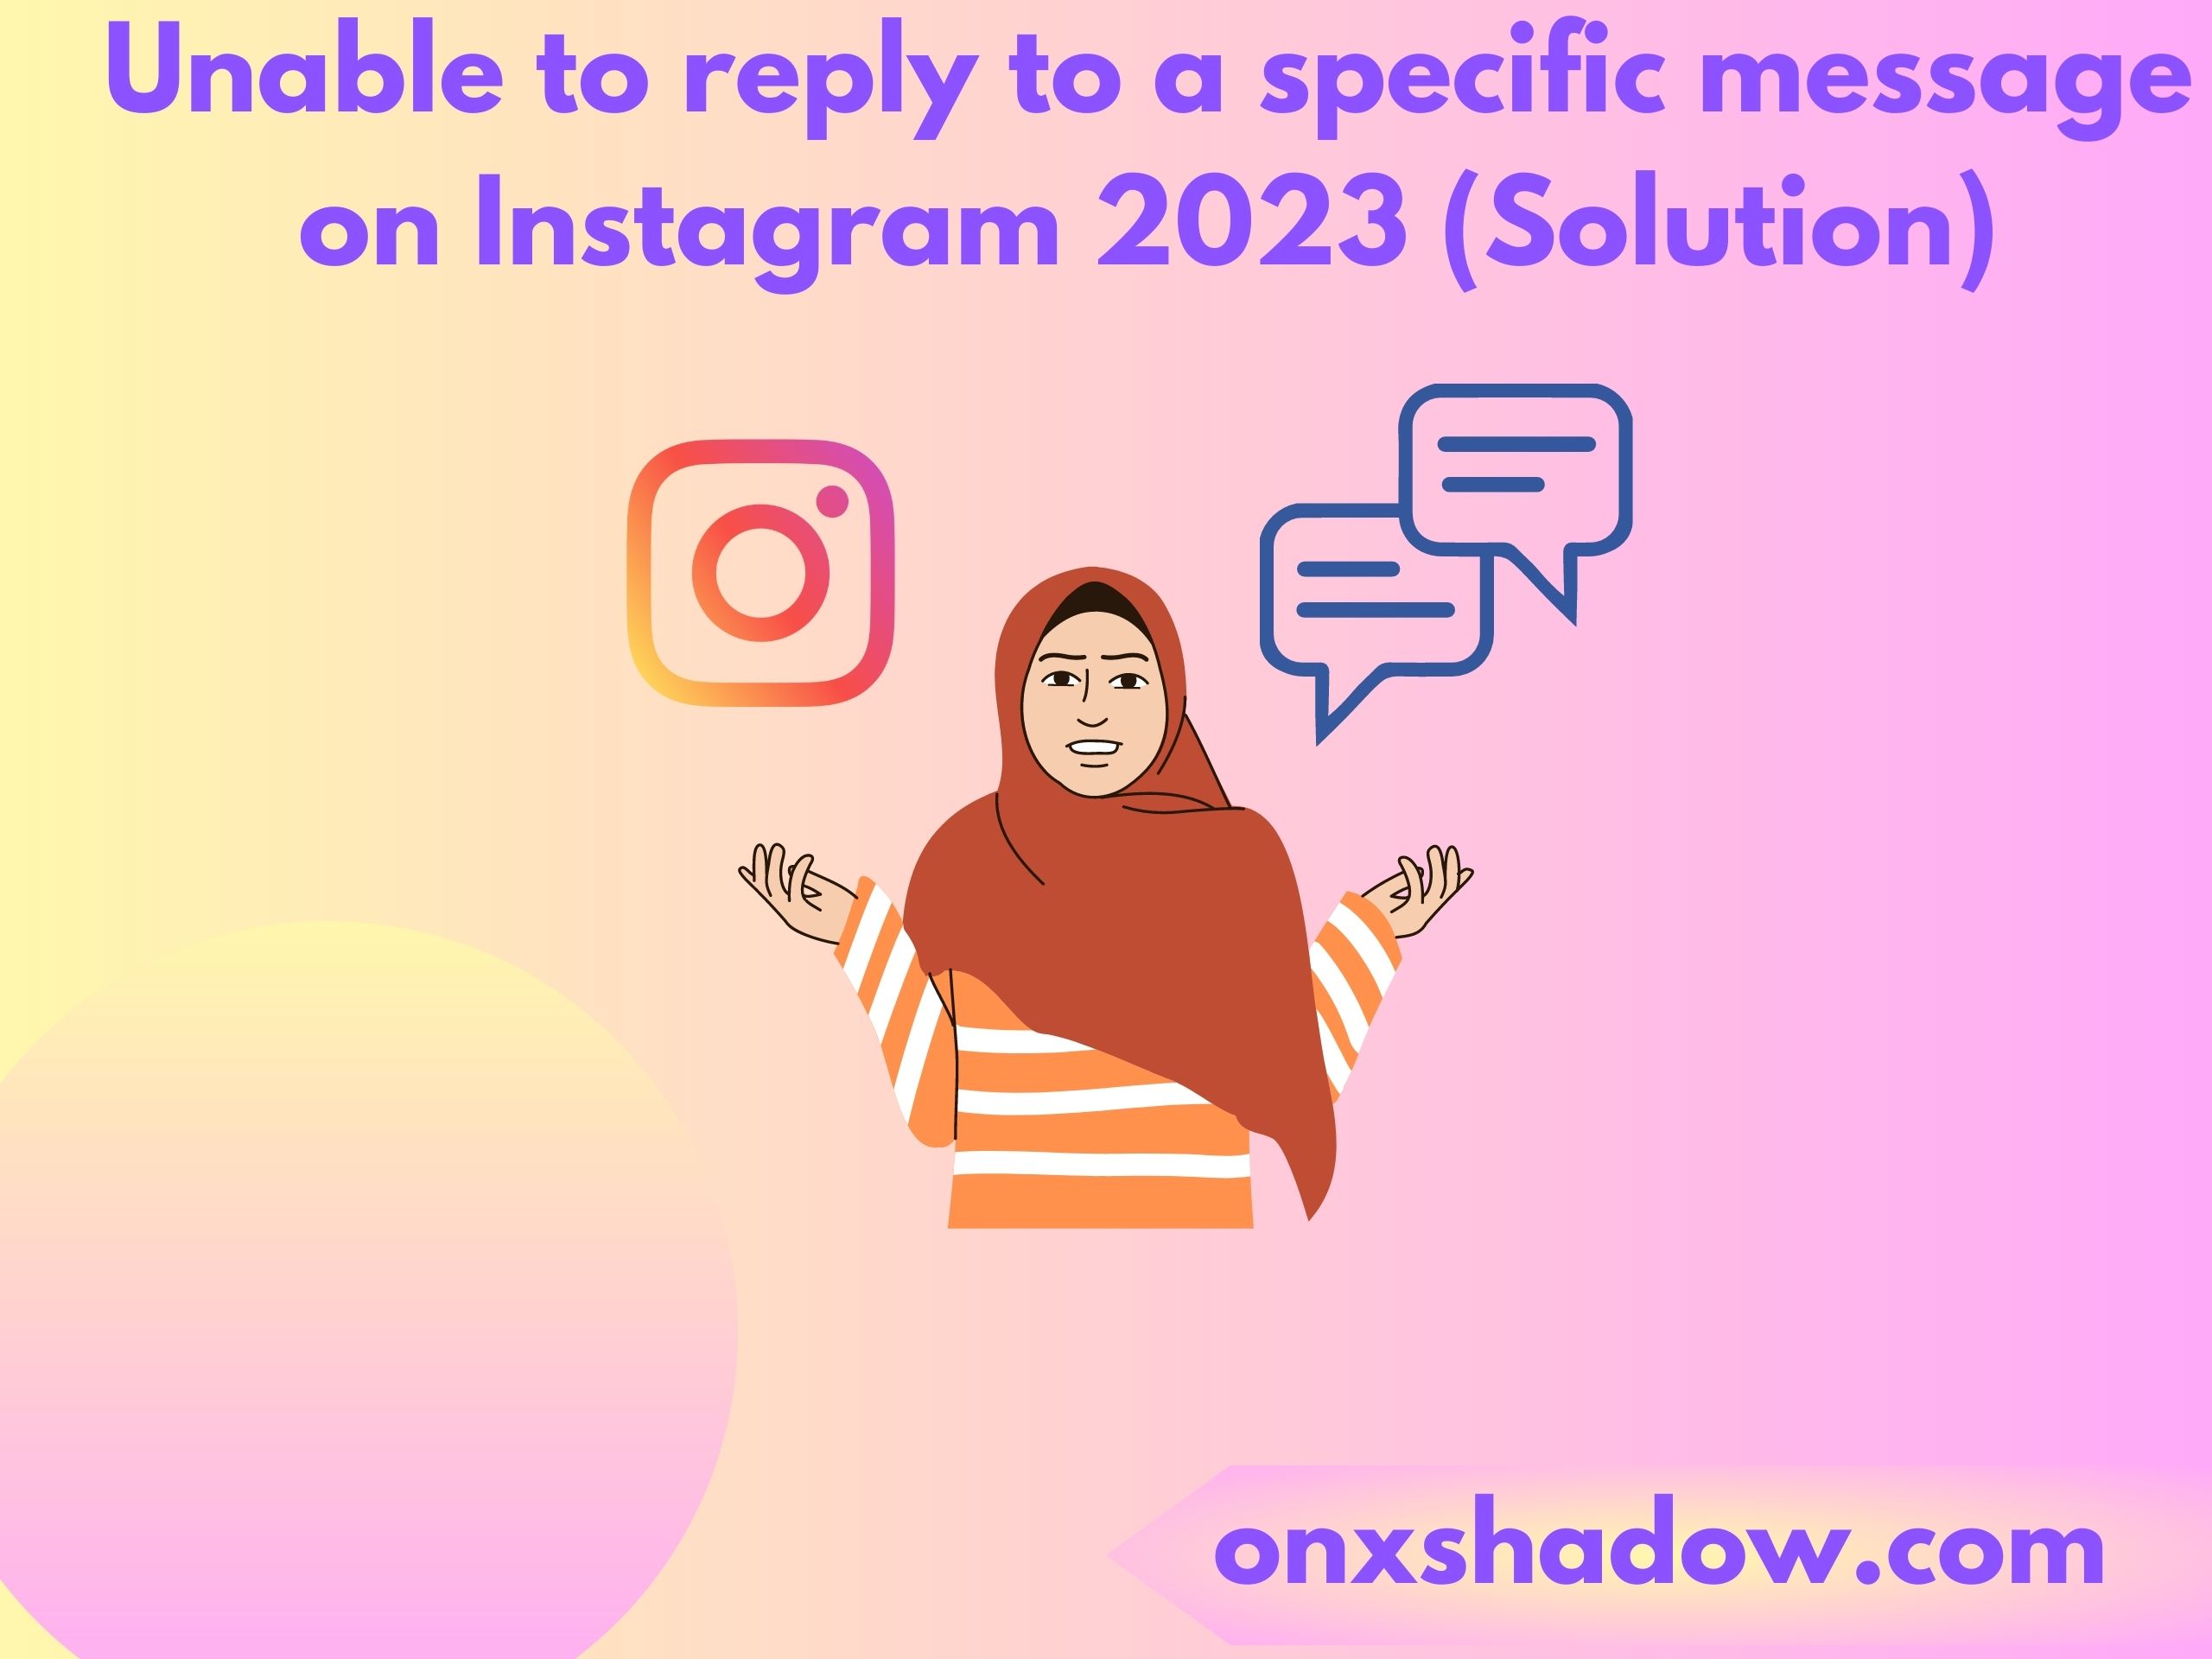 Unable to reply to a specific message on Instagram 2023 (Solution)